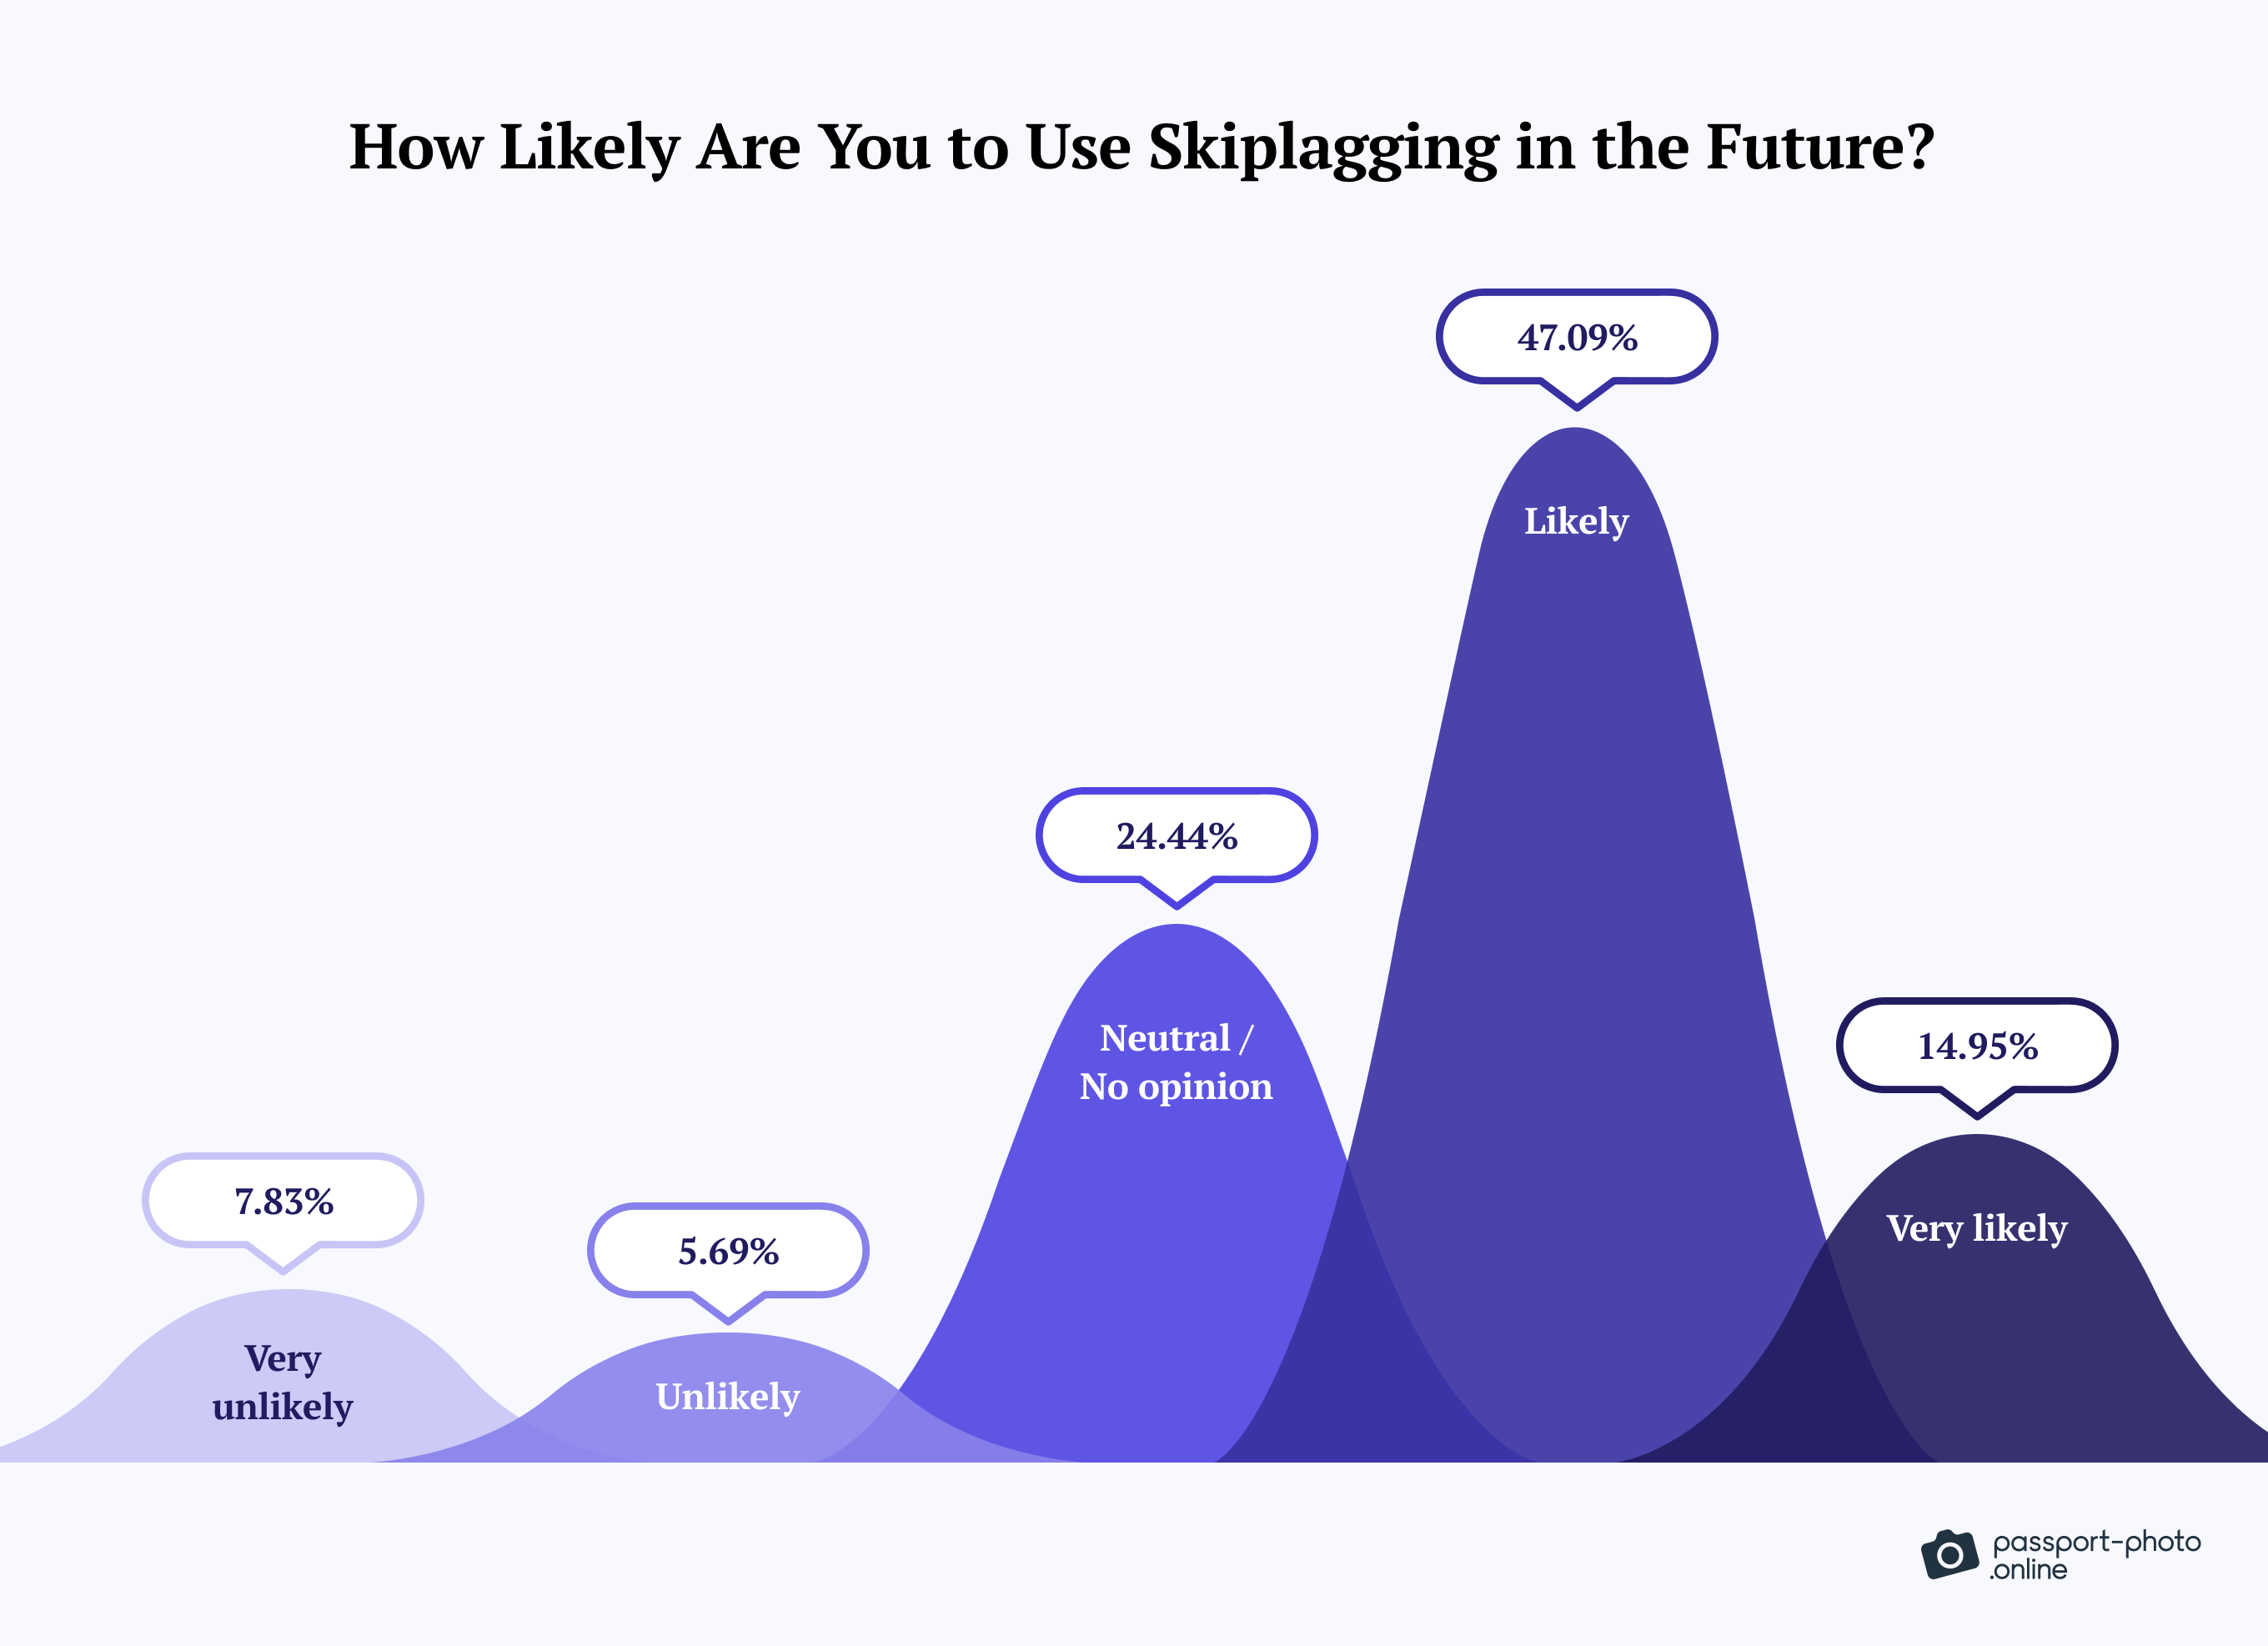 The likelihood of travelers to skiplag in the future, with the majority planning to do so